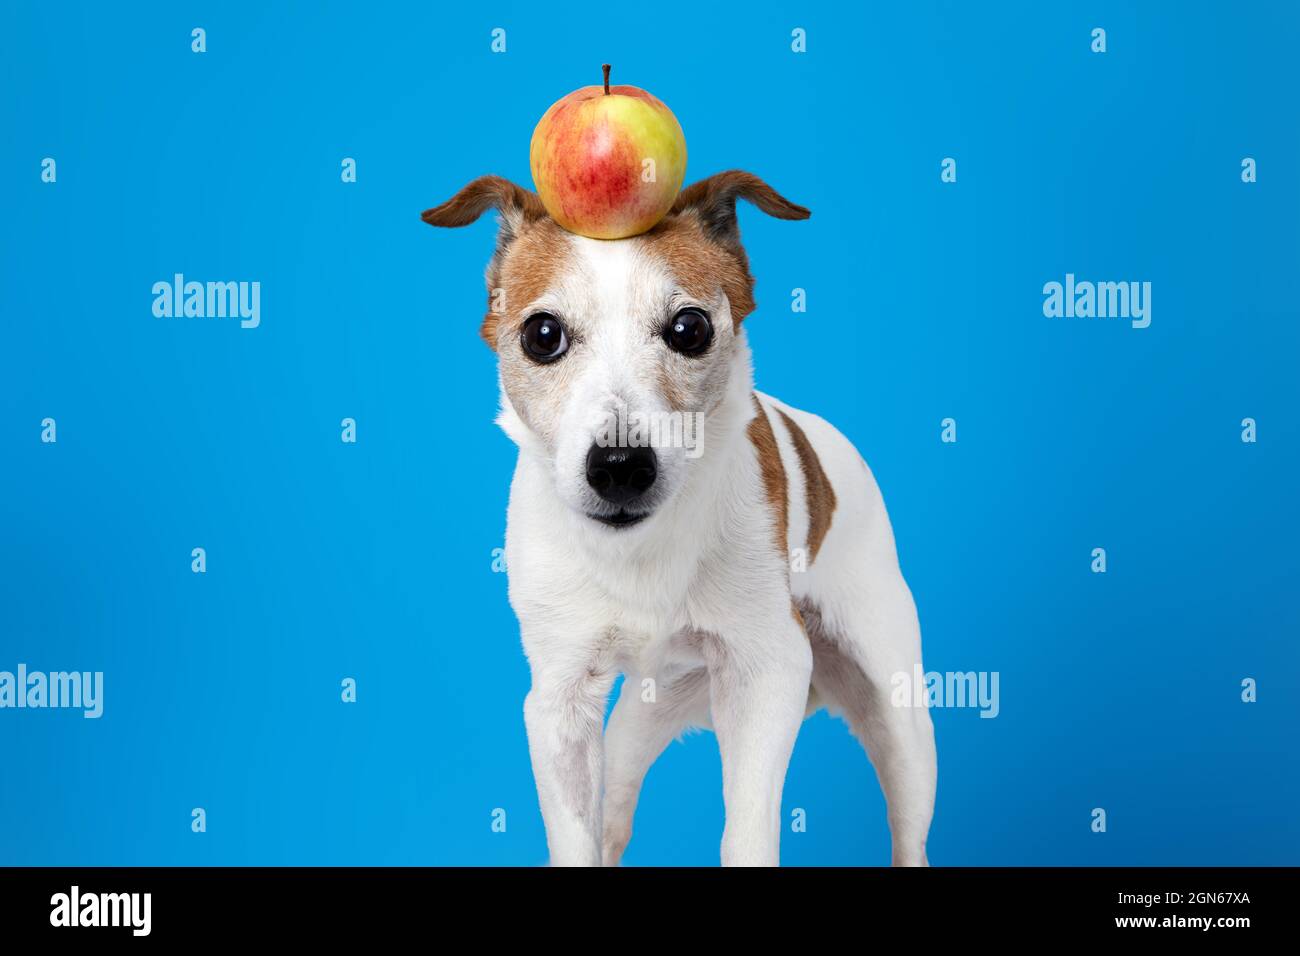 Cute funny Jack Russell Terrier dog with whole fresh yellow apple on head looking at camera against blue background Stock Photo